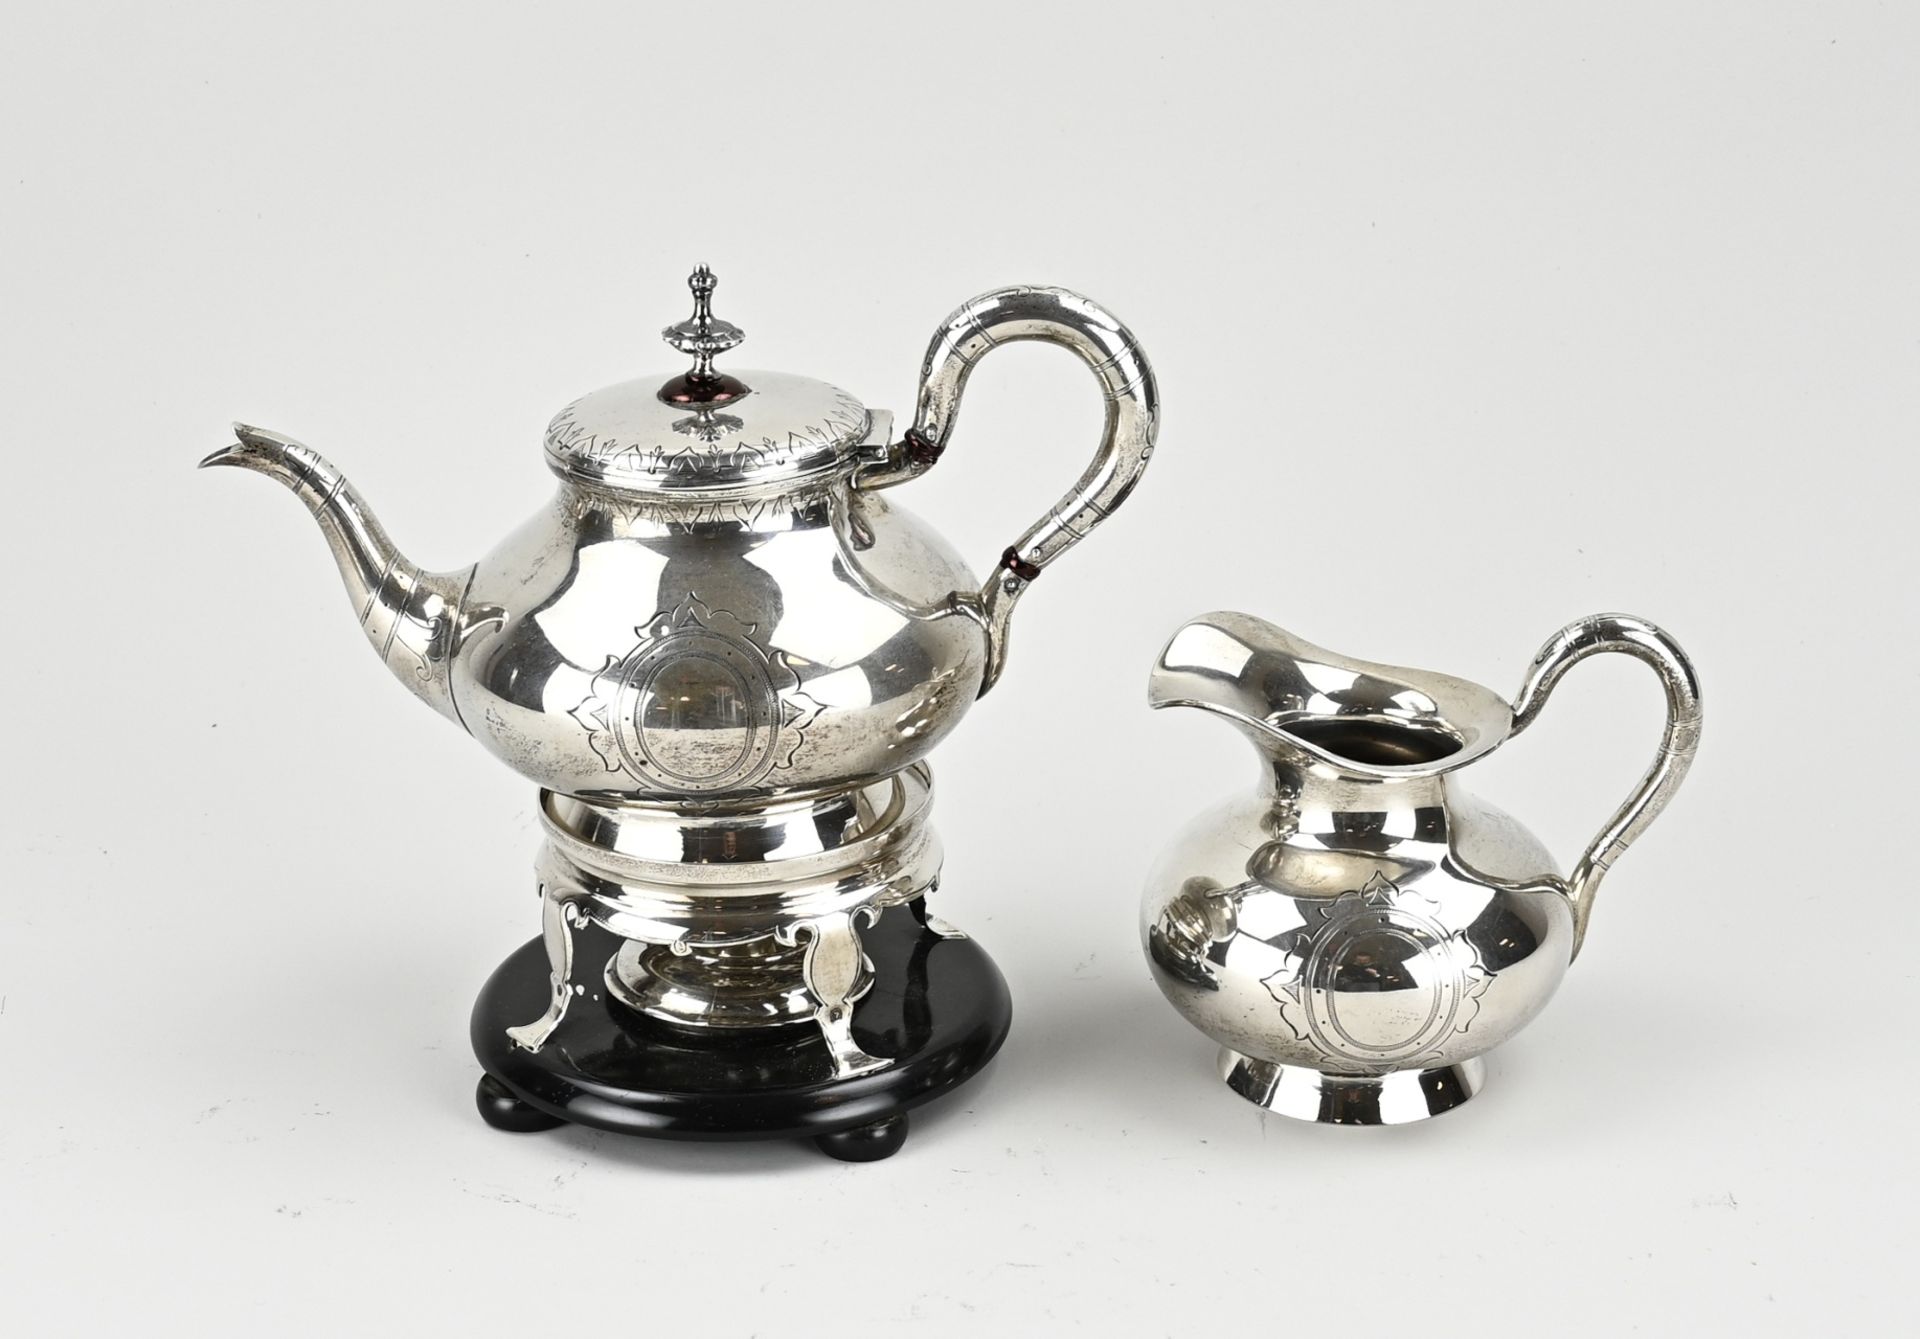 Silver tea set with stove